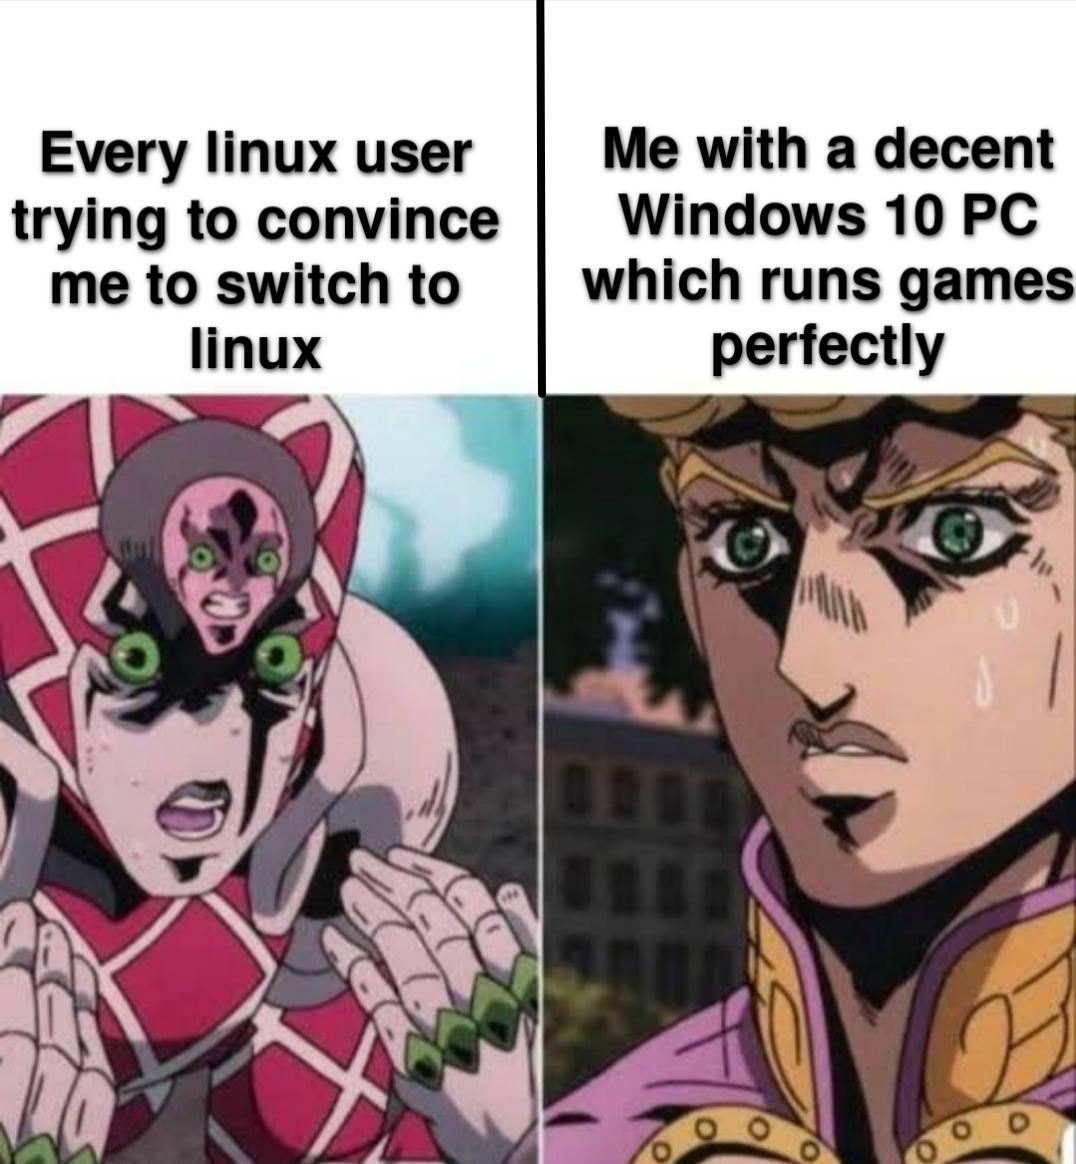 dank memes - funny memes - drinking the kool aid - Every linux user trying to convince me to switch to linux Me with a decent Windows 10 Pc which runs games perfectly O o